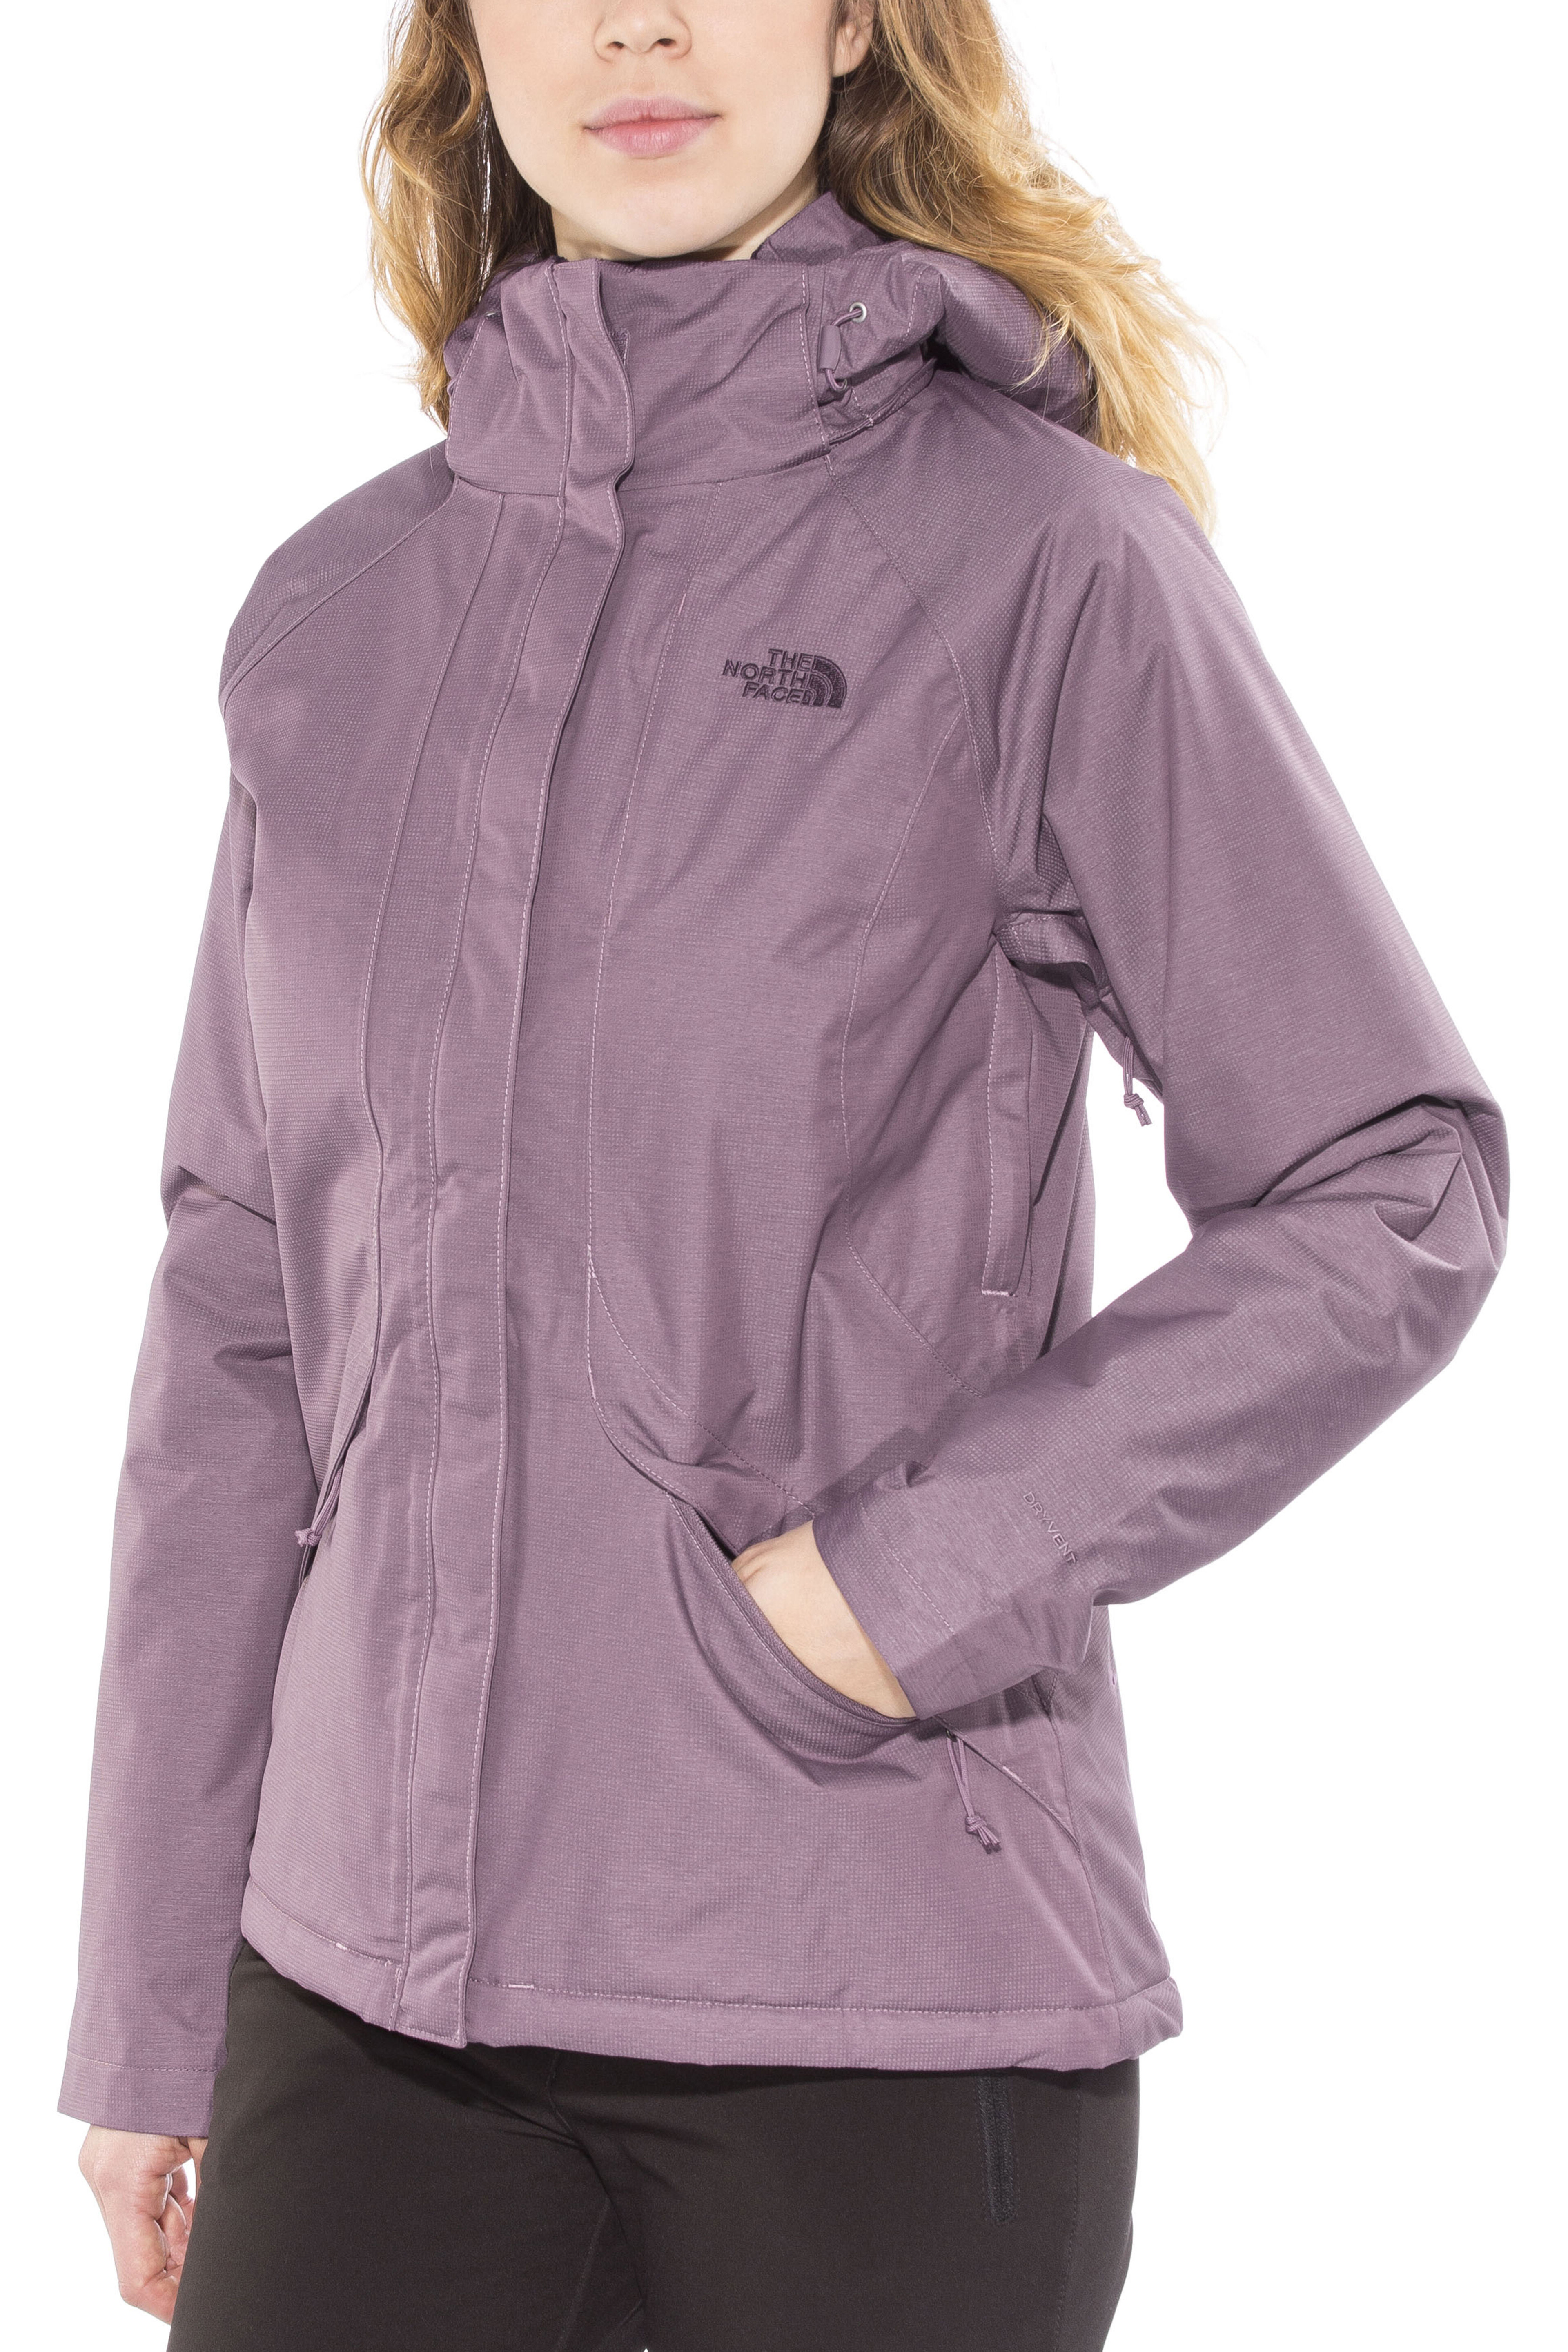 The North Face Inlux Insulated Jacket Women black plum heather at ...